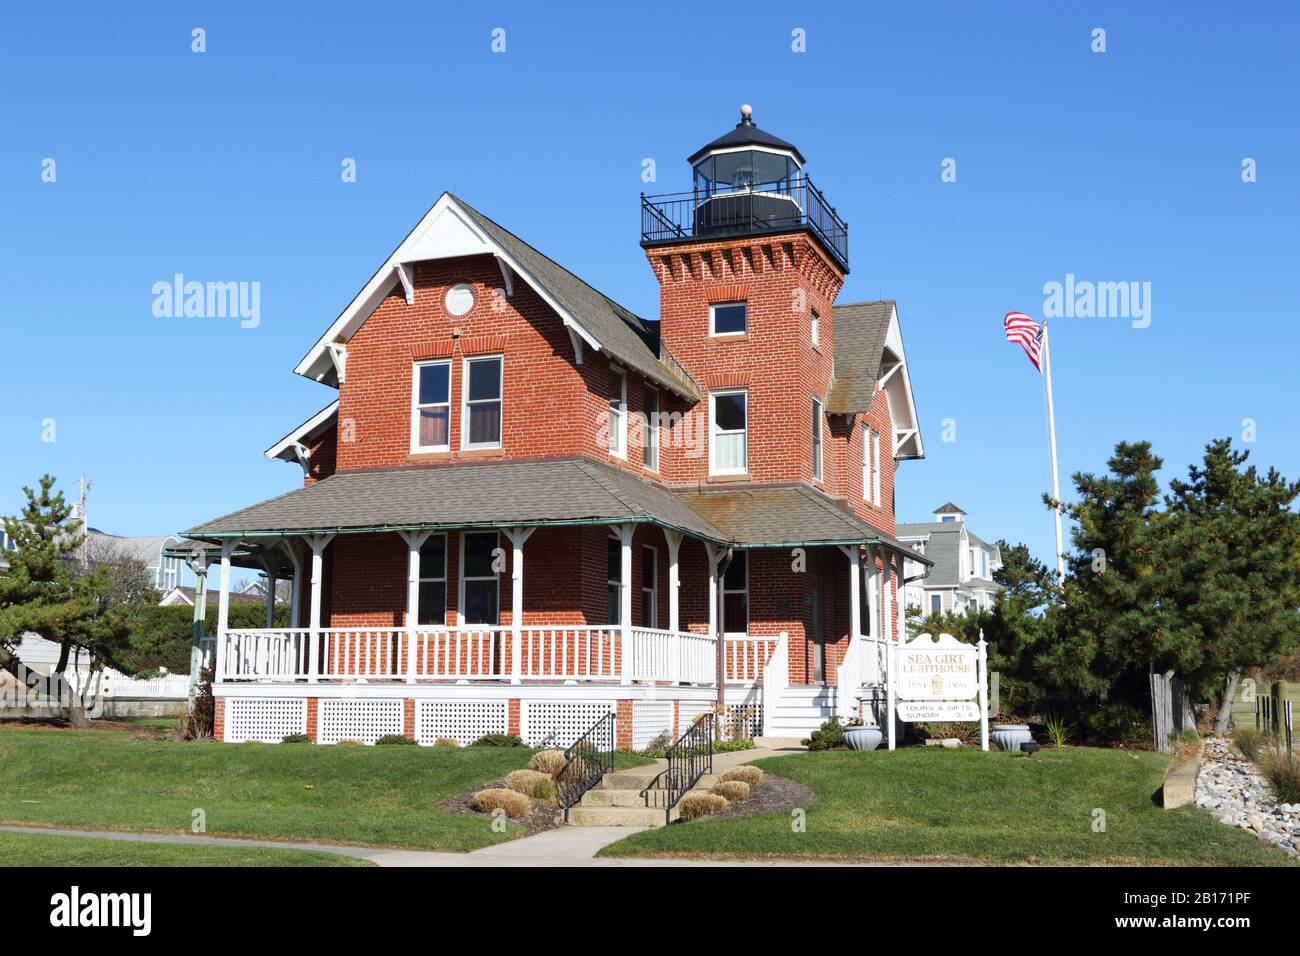 The Sea Girt Light is a lighthouse first lit in 1896 marking the inlet leading to the Wreck Pond in Sea Girt in Monmouth County, New Jersey, Stock Photo